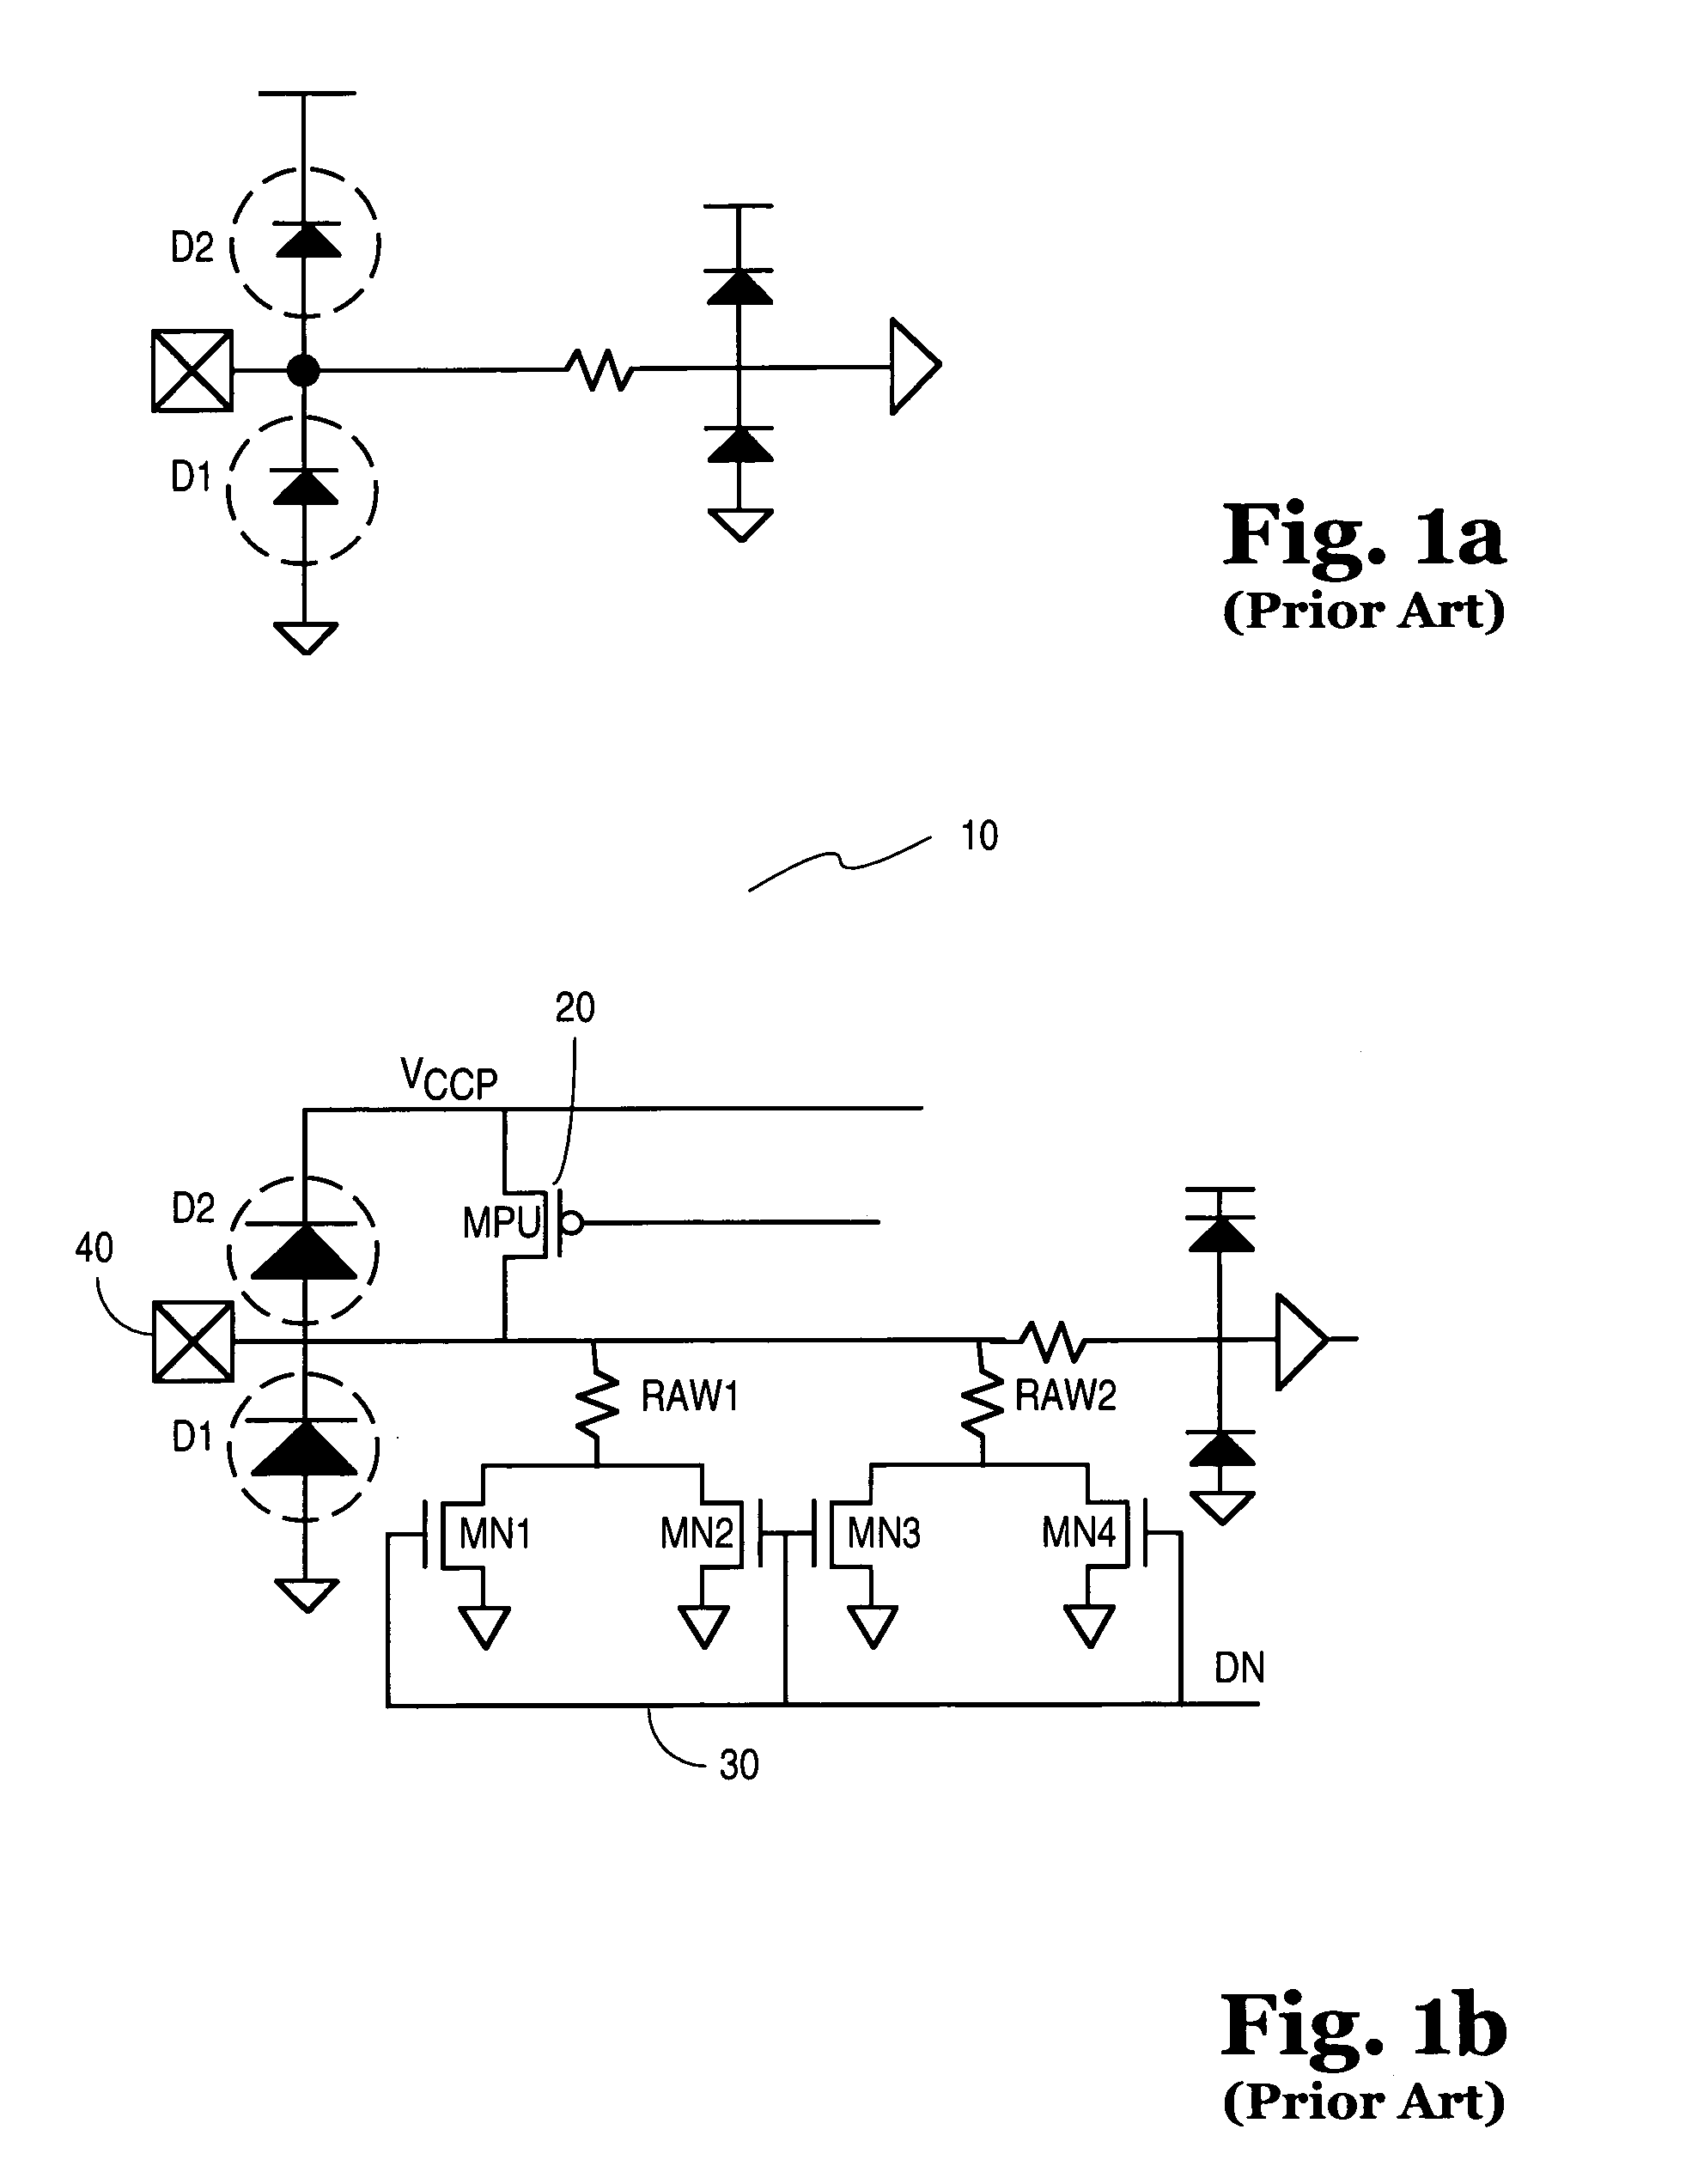 Diode and transistor design for high speed I/O